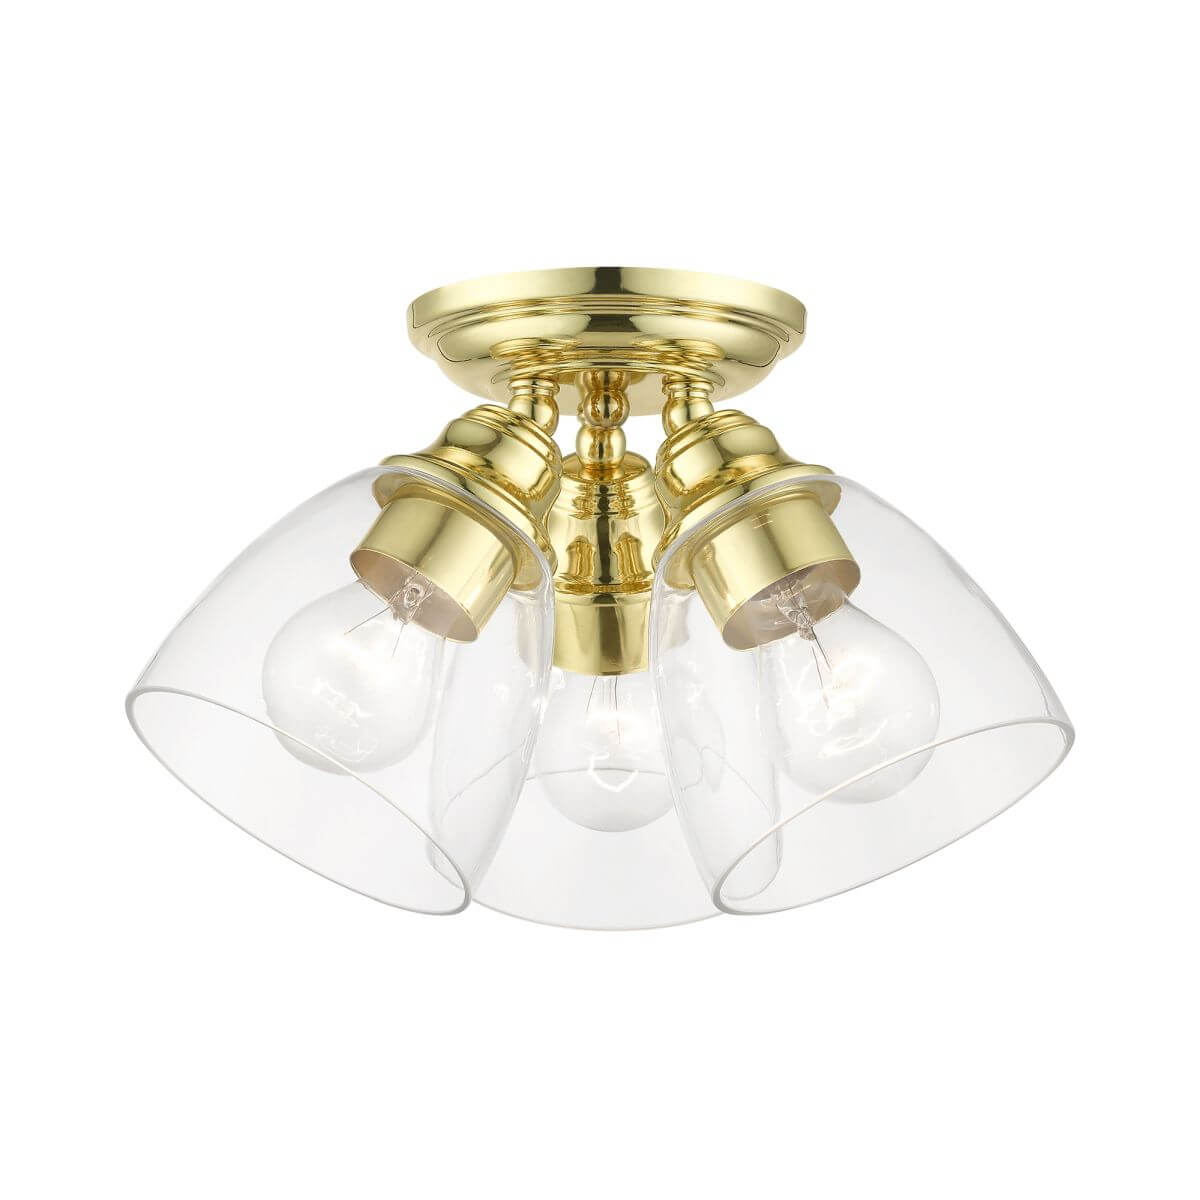 Livex 46339-02 Montgomery 3 Light 14 inch Semi-Flush Mount in Polished Brass with Hand Blown Clear Glass